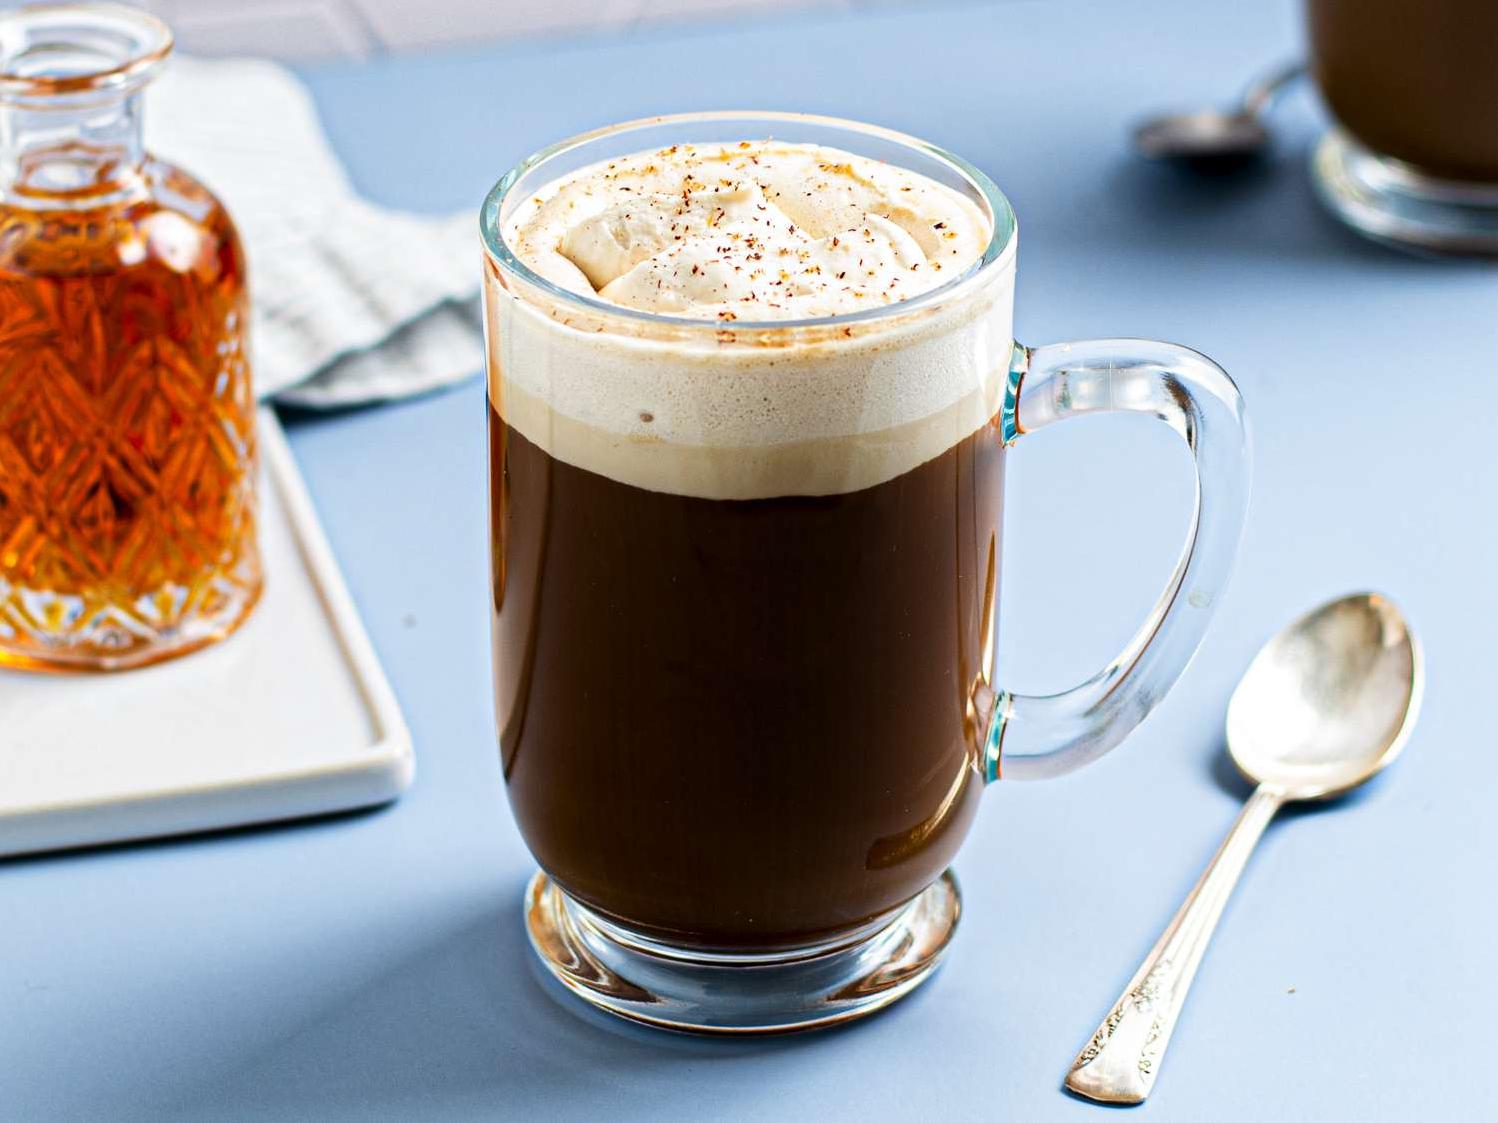  Spice things up in the morning with this delicious coffee recipe.